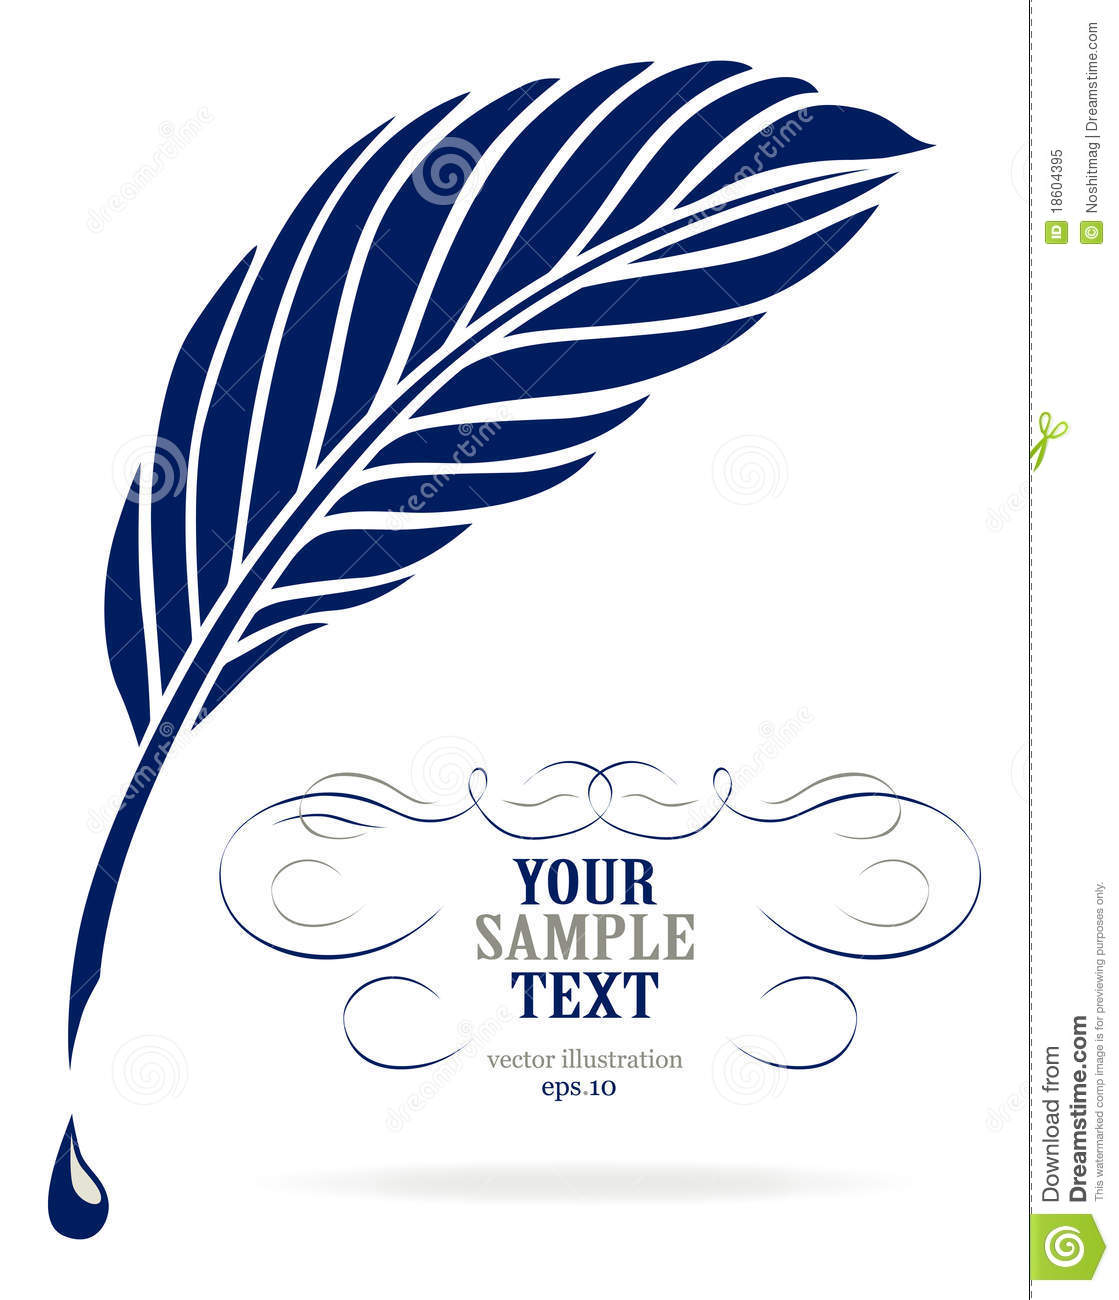 Ink Feather Pen Royalty Free Stock Photo   Image  18604395